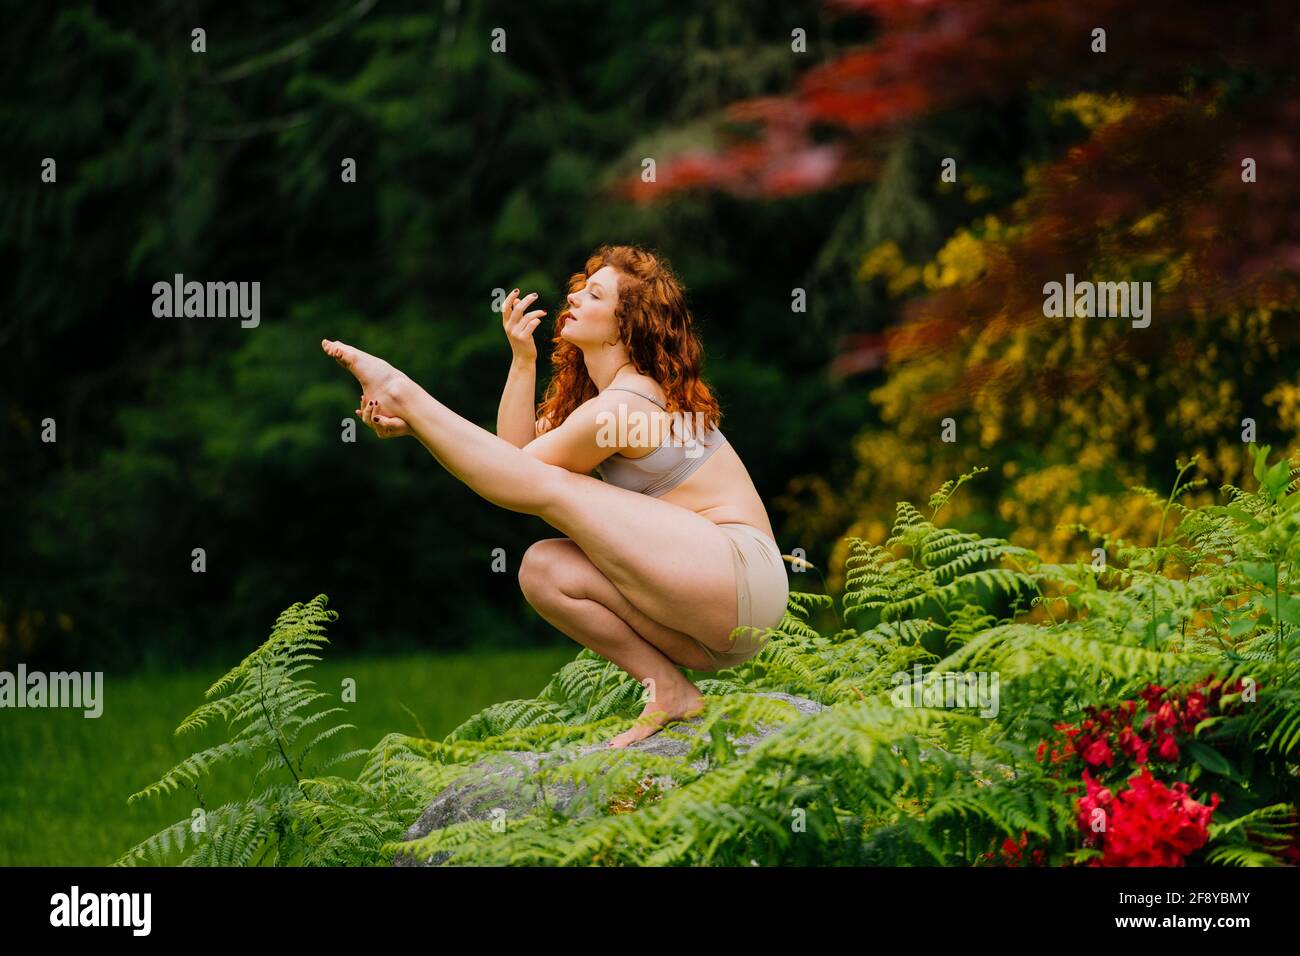 Redhead woman doing yoga on stone in forest Stock Photo